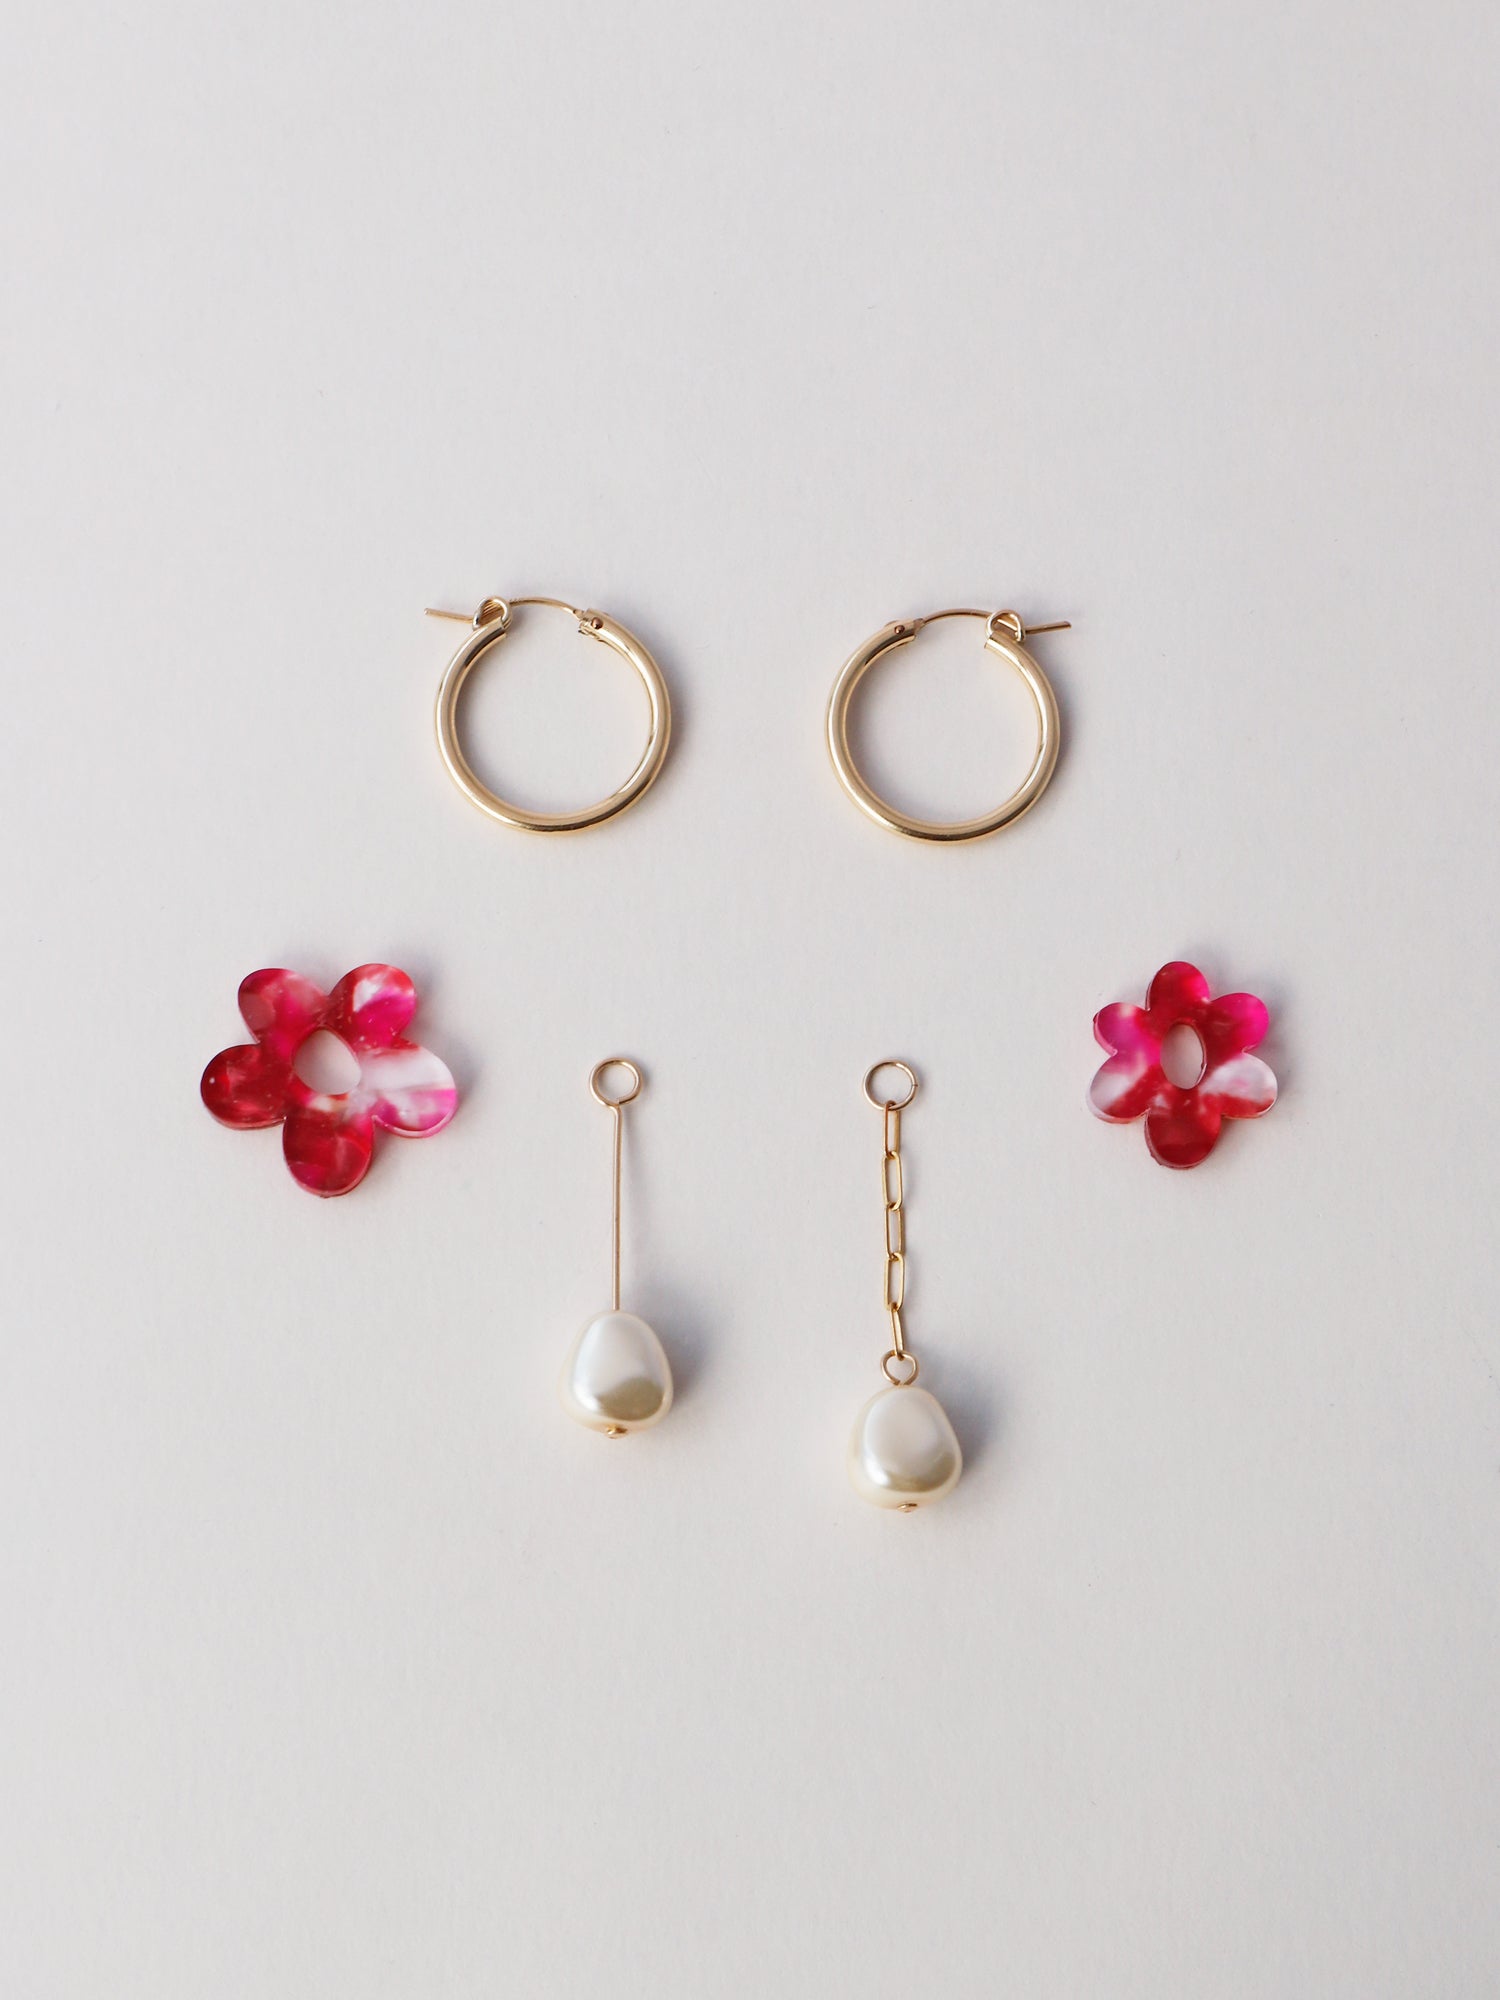 Nina Charm Hoops in Raspberry Crush. 4 individual charms made using 100% recycled, semi-transparent, pink acrylic with a brushed matt finish and faux pearls. Handmade in the UK by Wolf & Moon. 